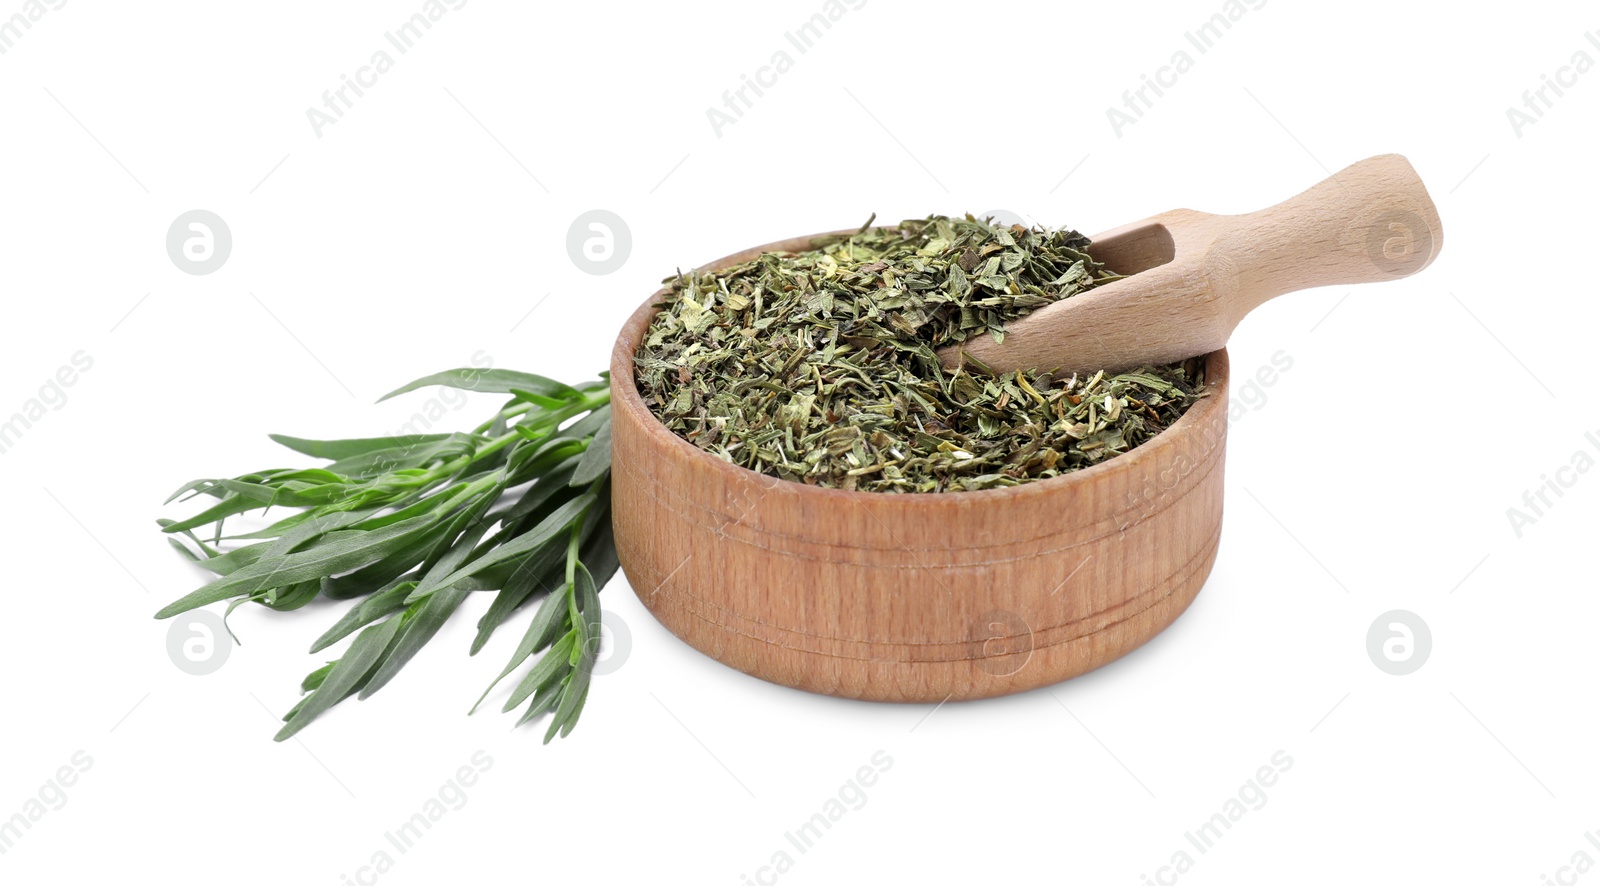 Photo of Bowl of dry tarragon, scoop and fresh leaves isolated on white